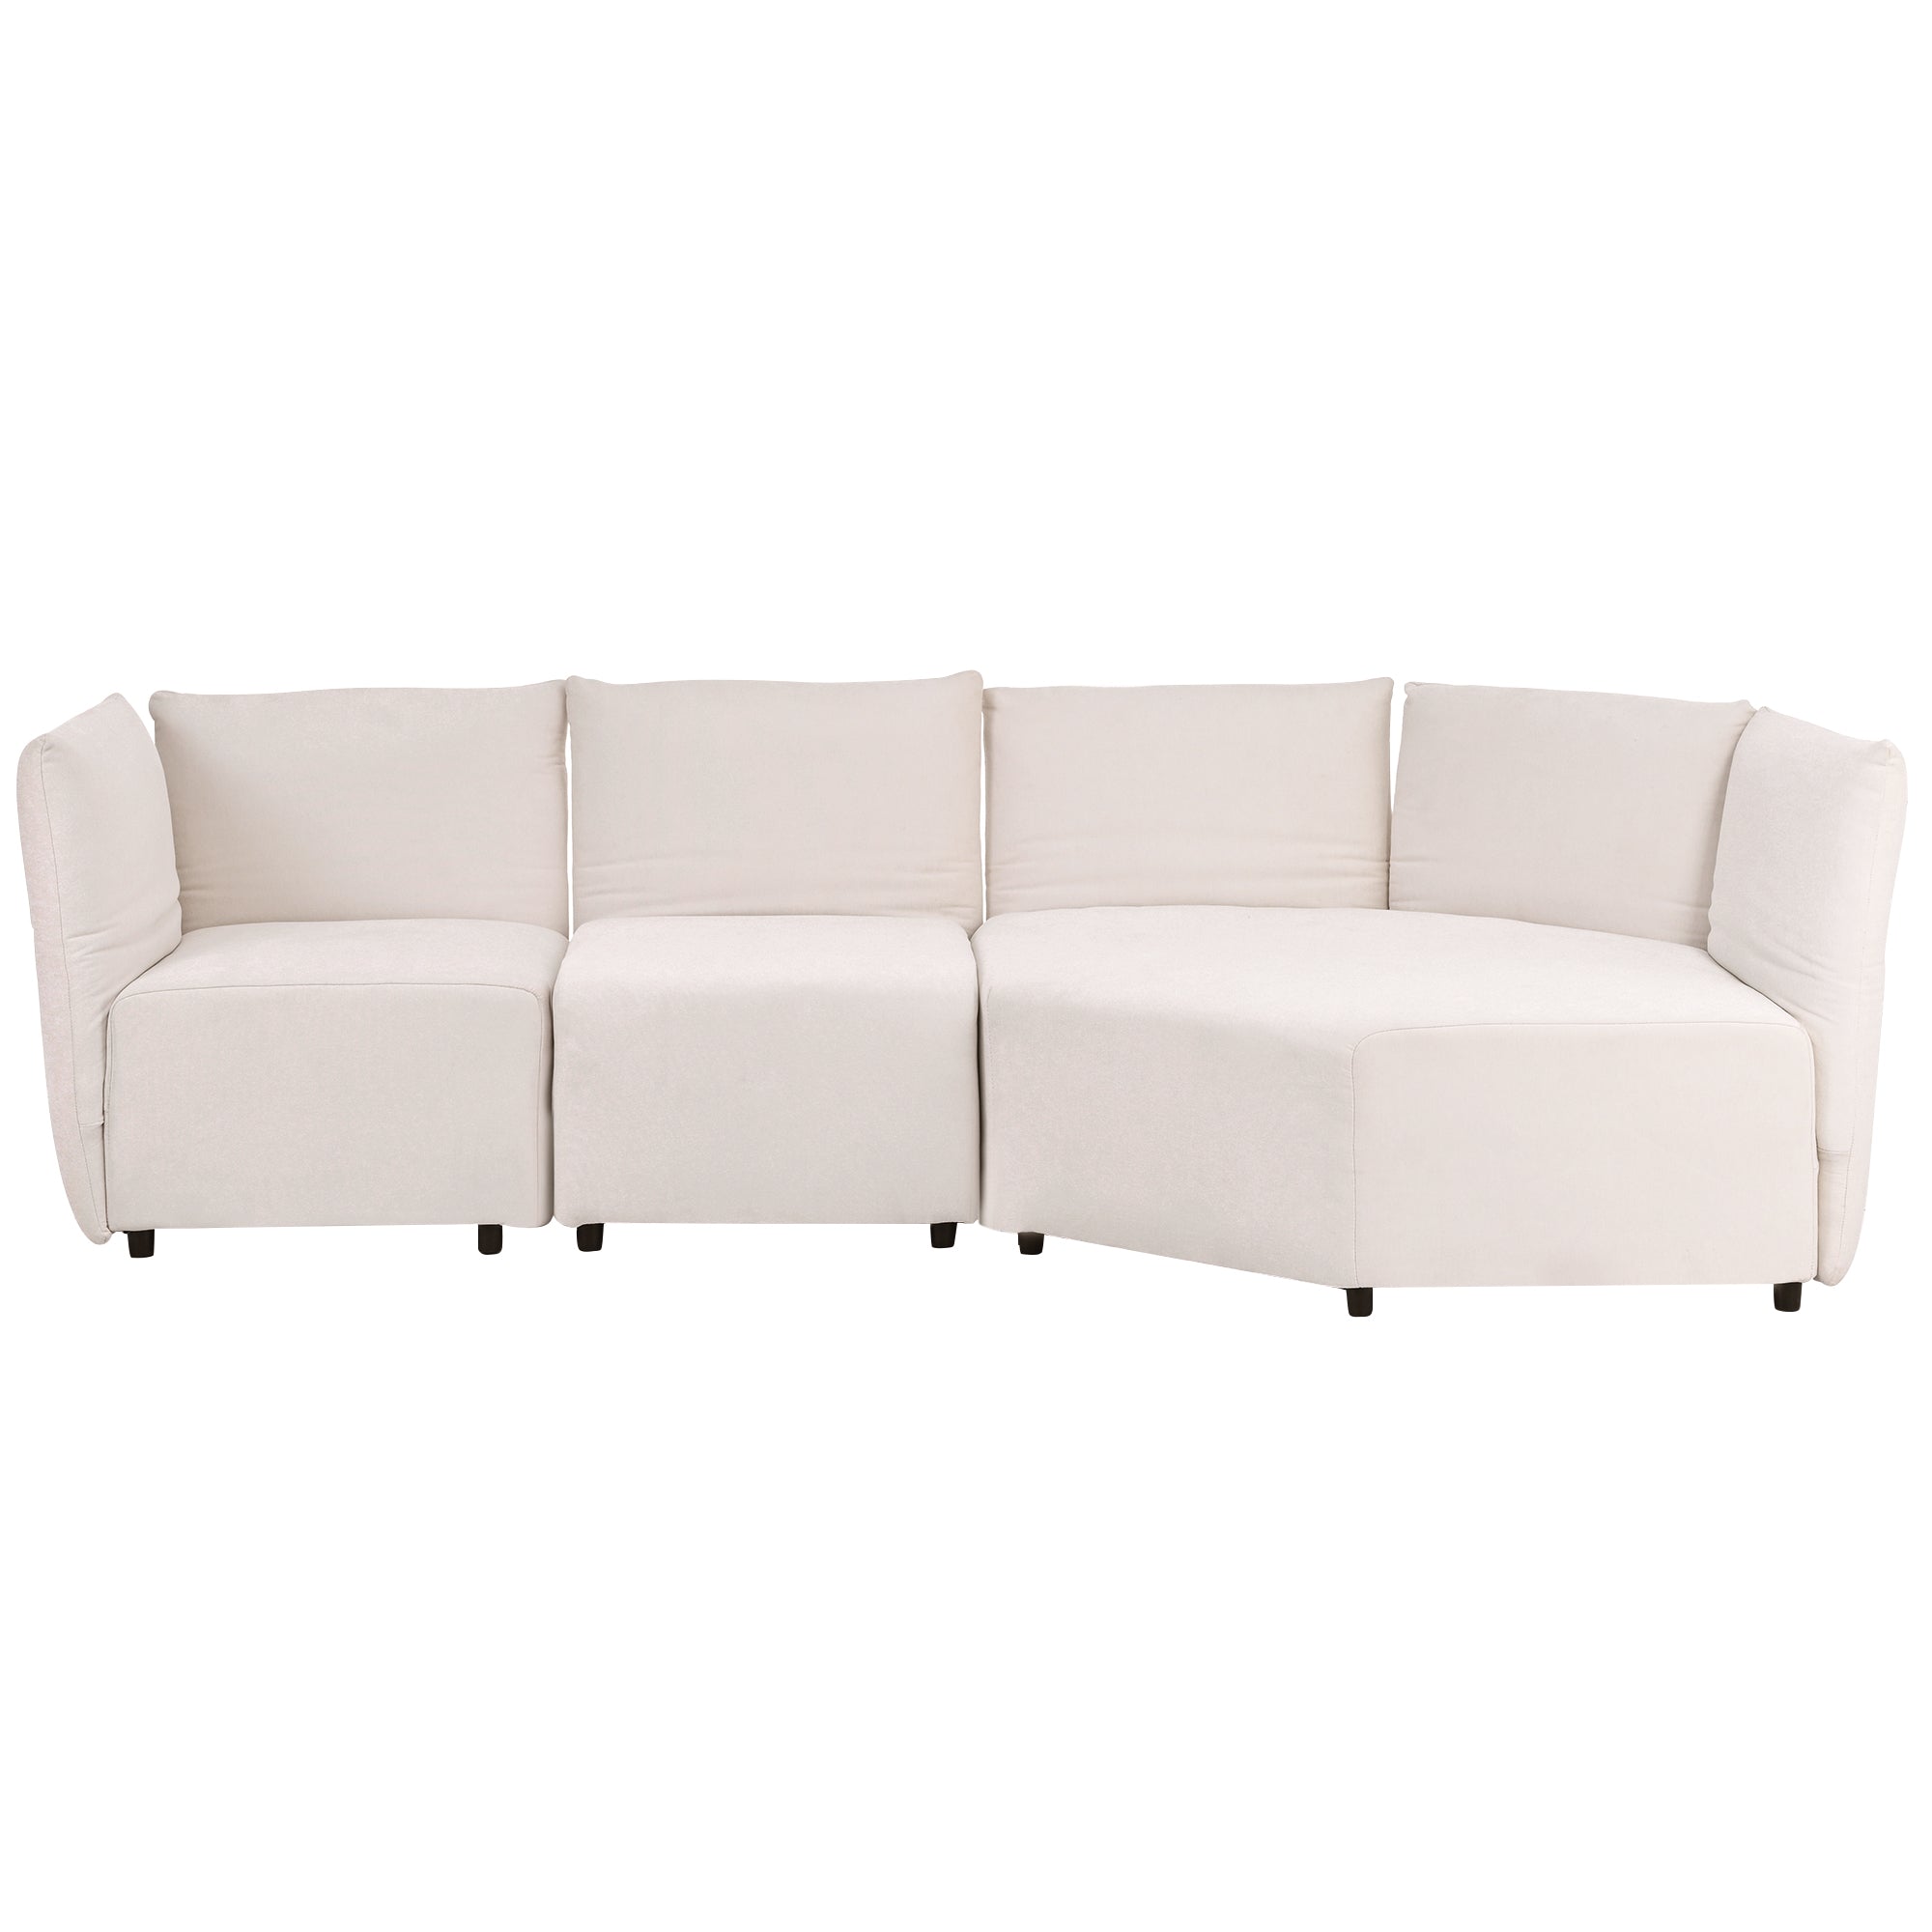 Bellemave 106.3" Stylish Sofa Set with Polyester Upholstery with Adjustable Back with Free Combination